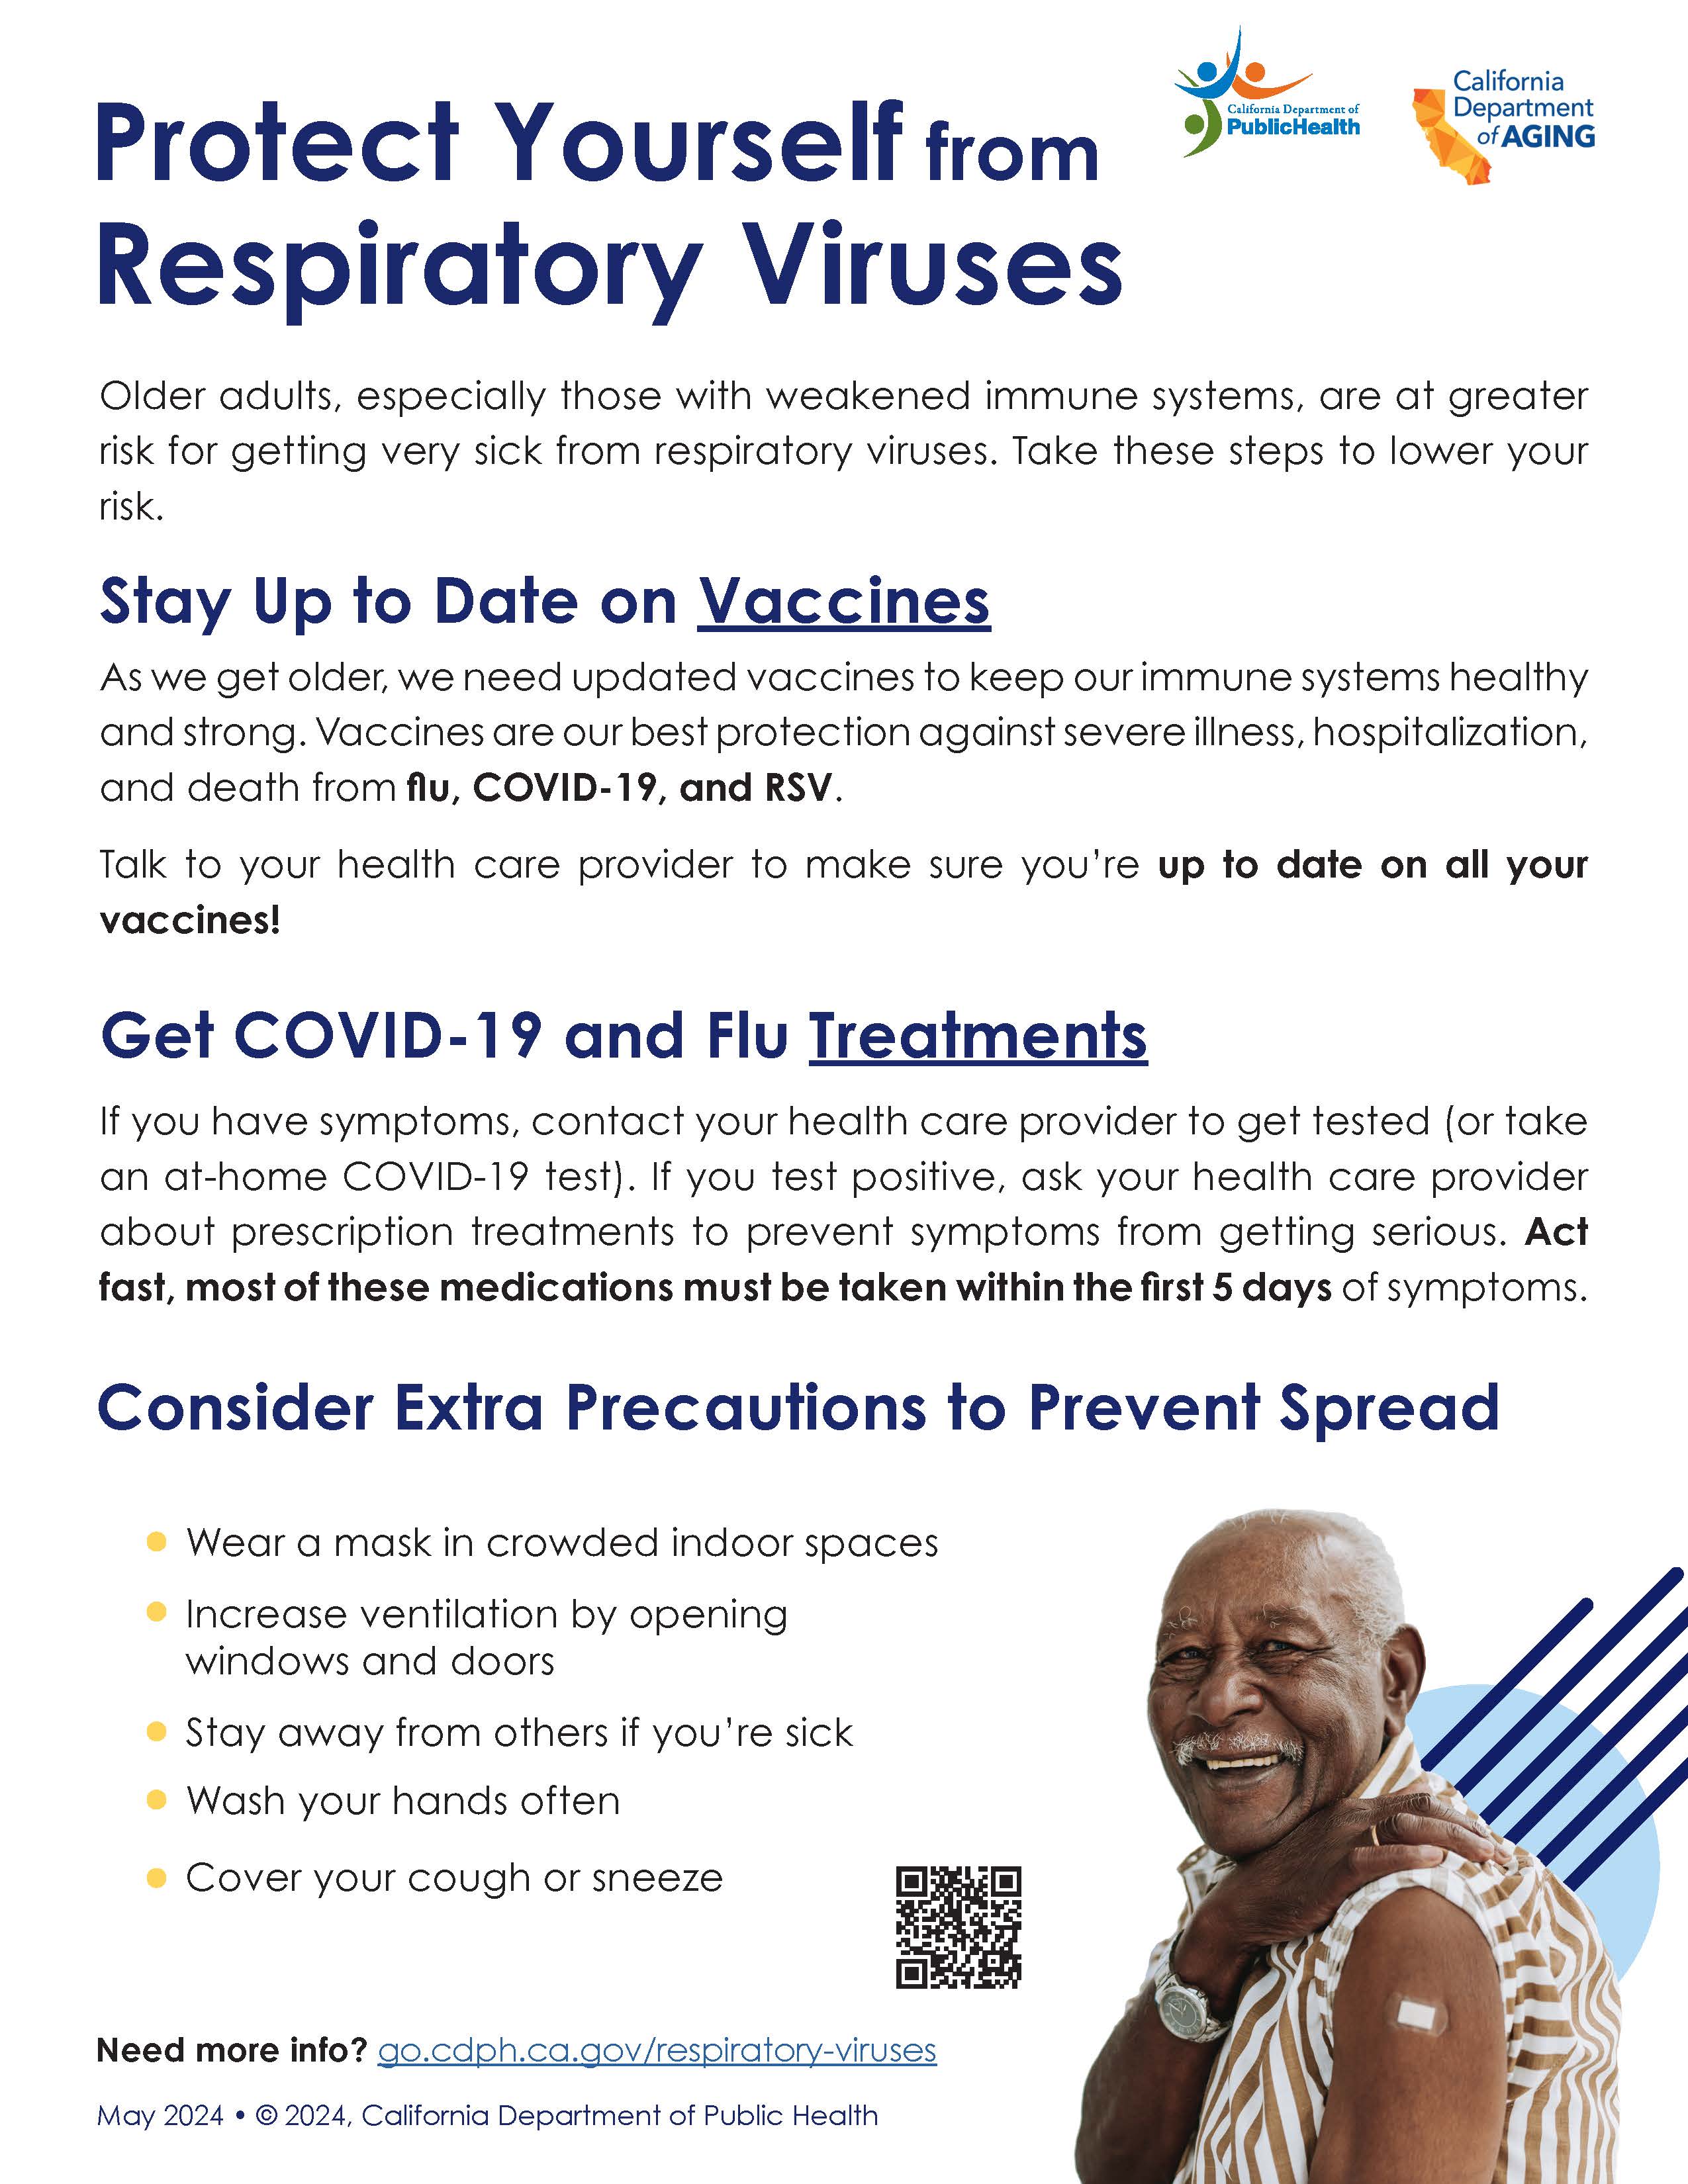 Protect Yourself from Respiratory Viruses fact sheet